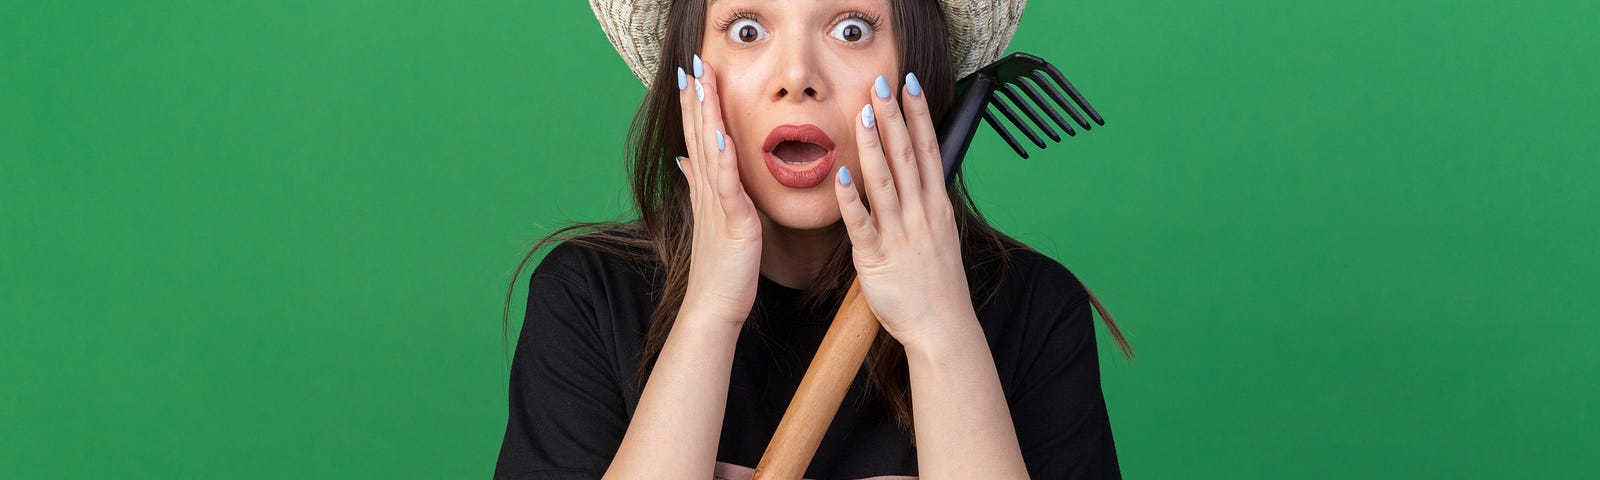 female gardener holding small rake and looking shocked against green background